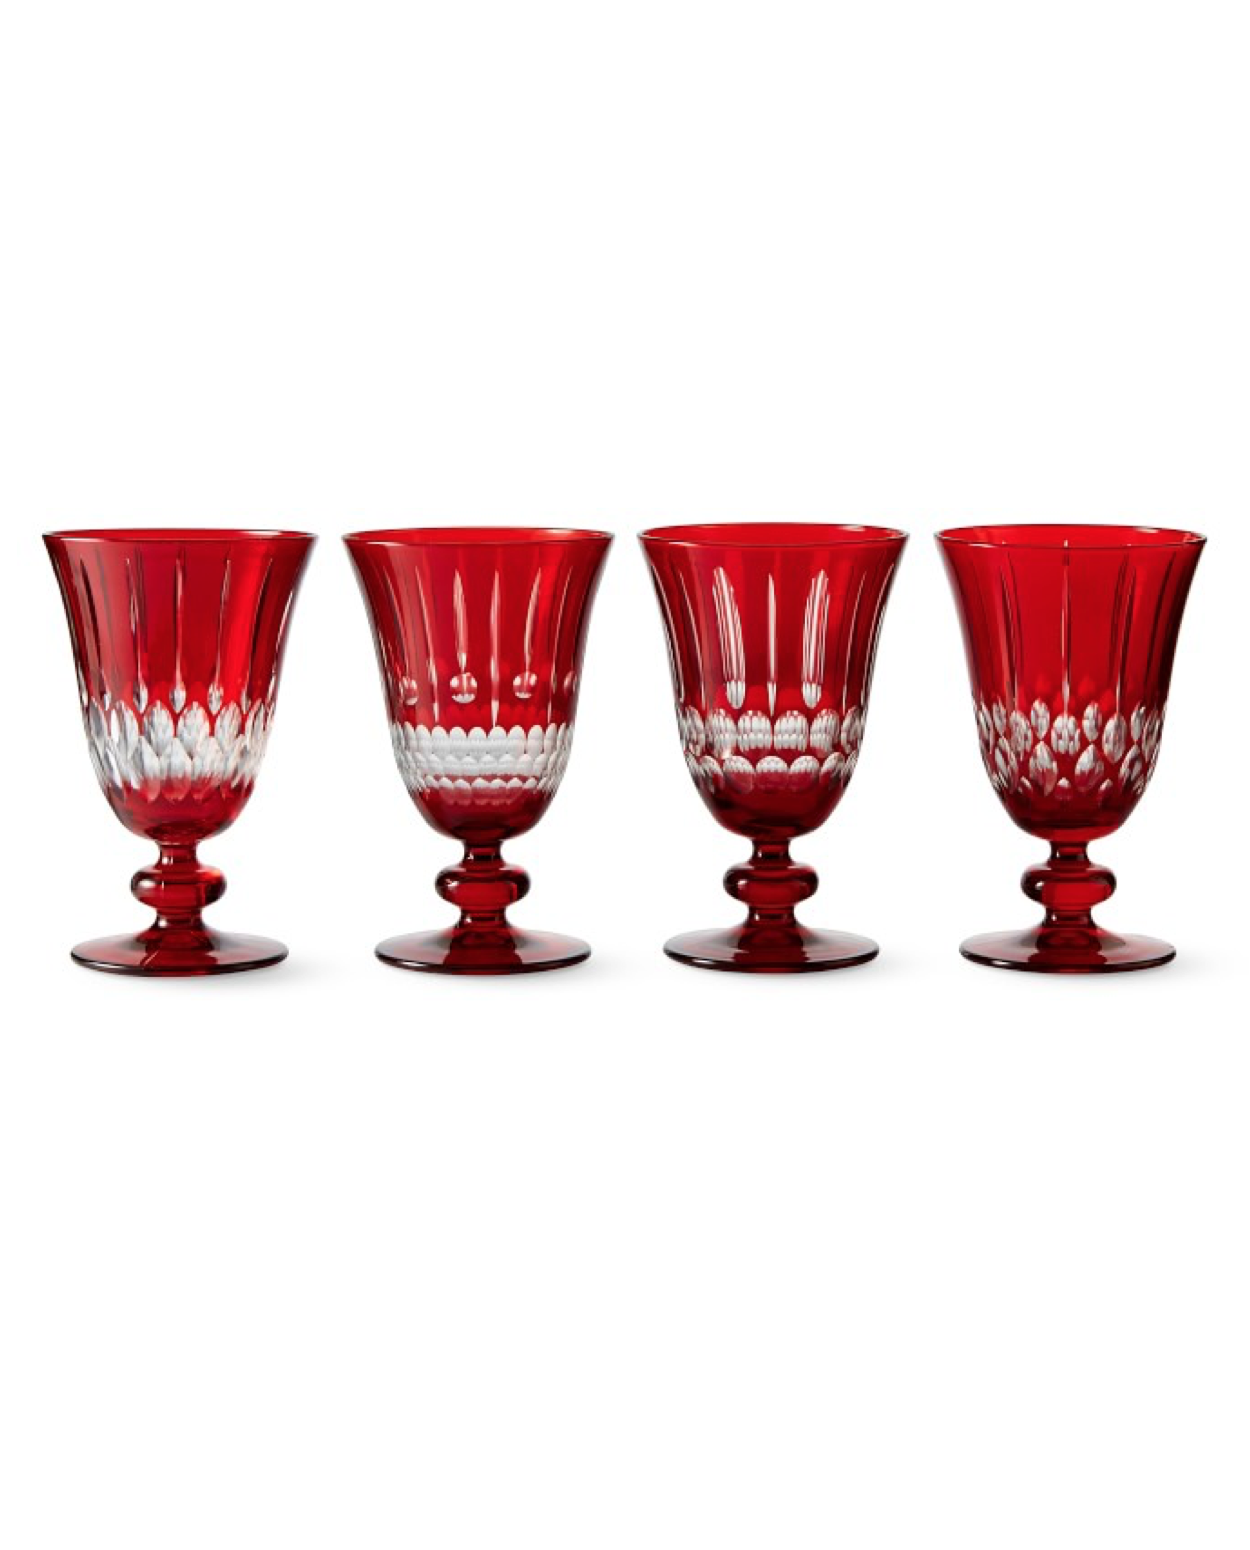 Wilshire Jewel Cut Red Goblets